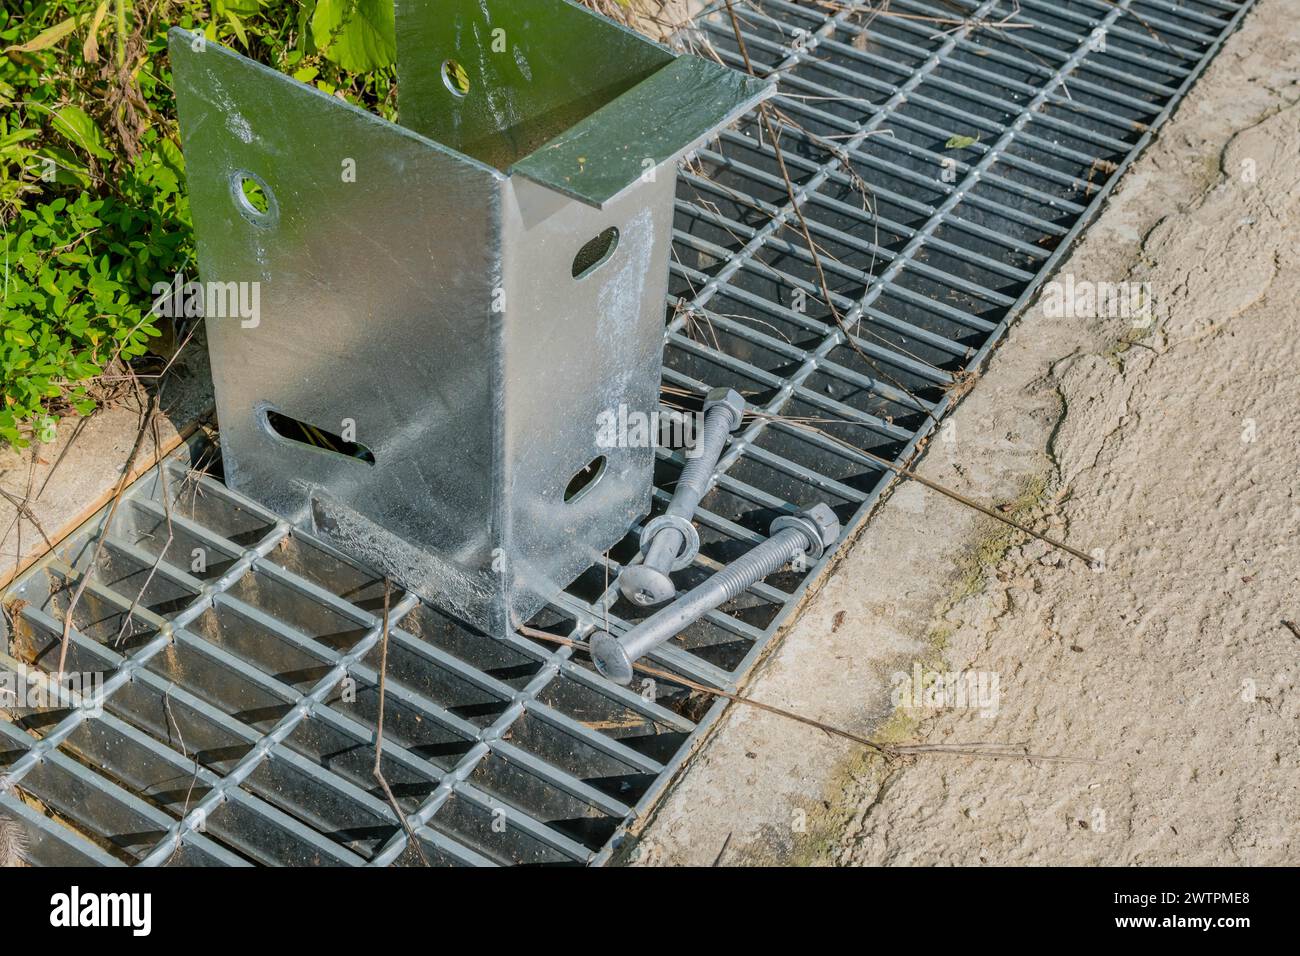 A close-up of a metal bracket support with screws on a steel grate, in Daejeon, South Korea Stock Photo